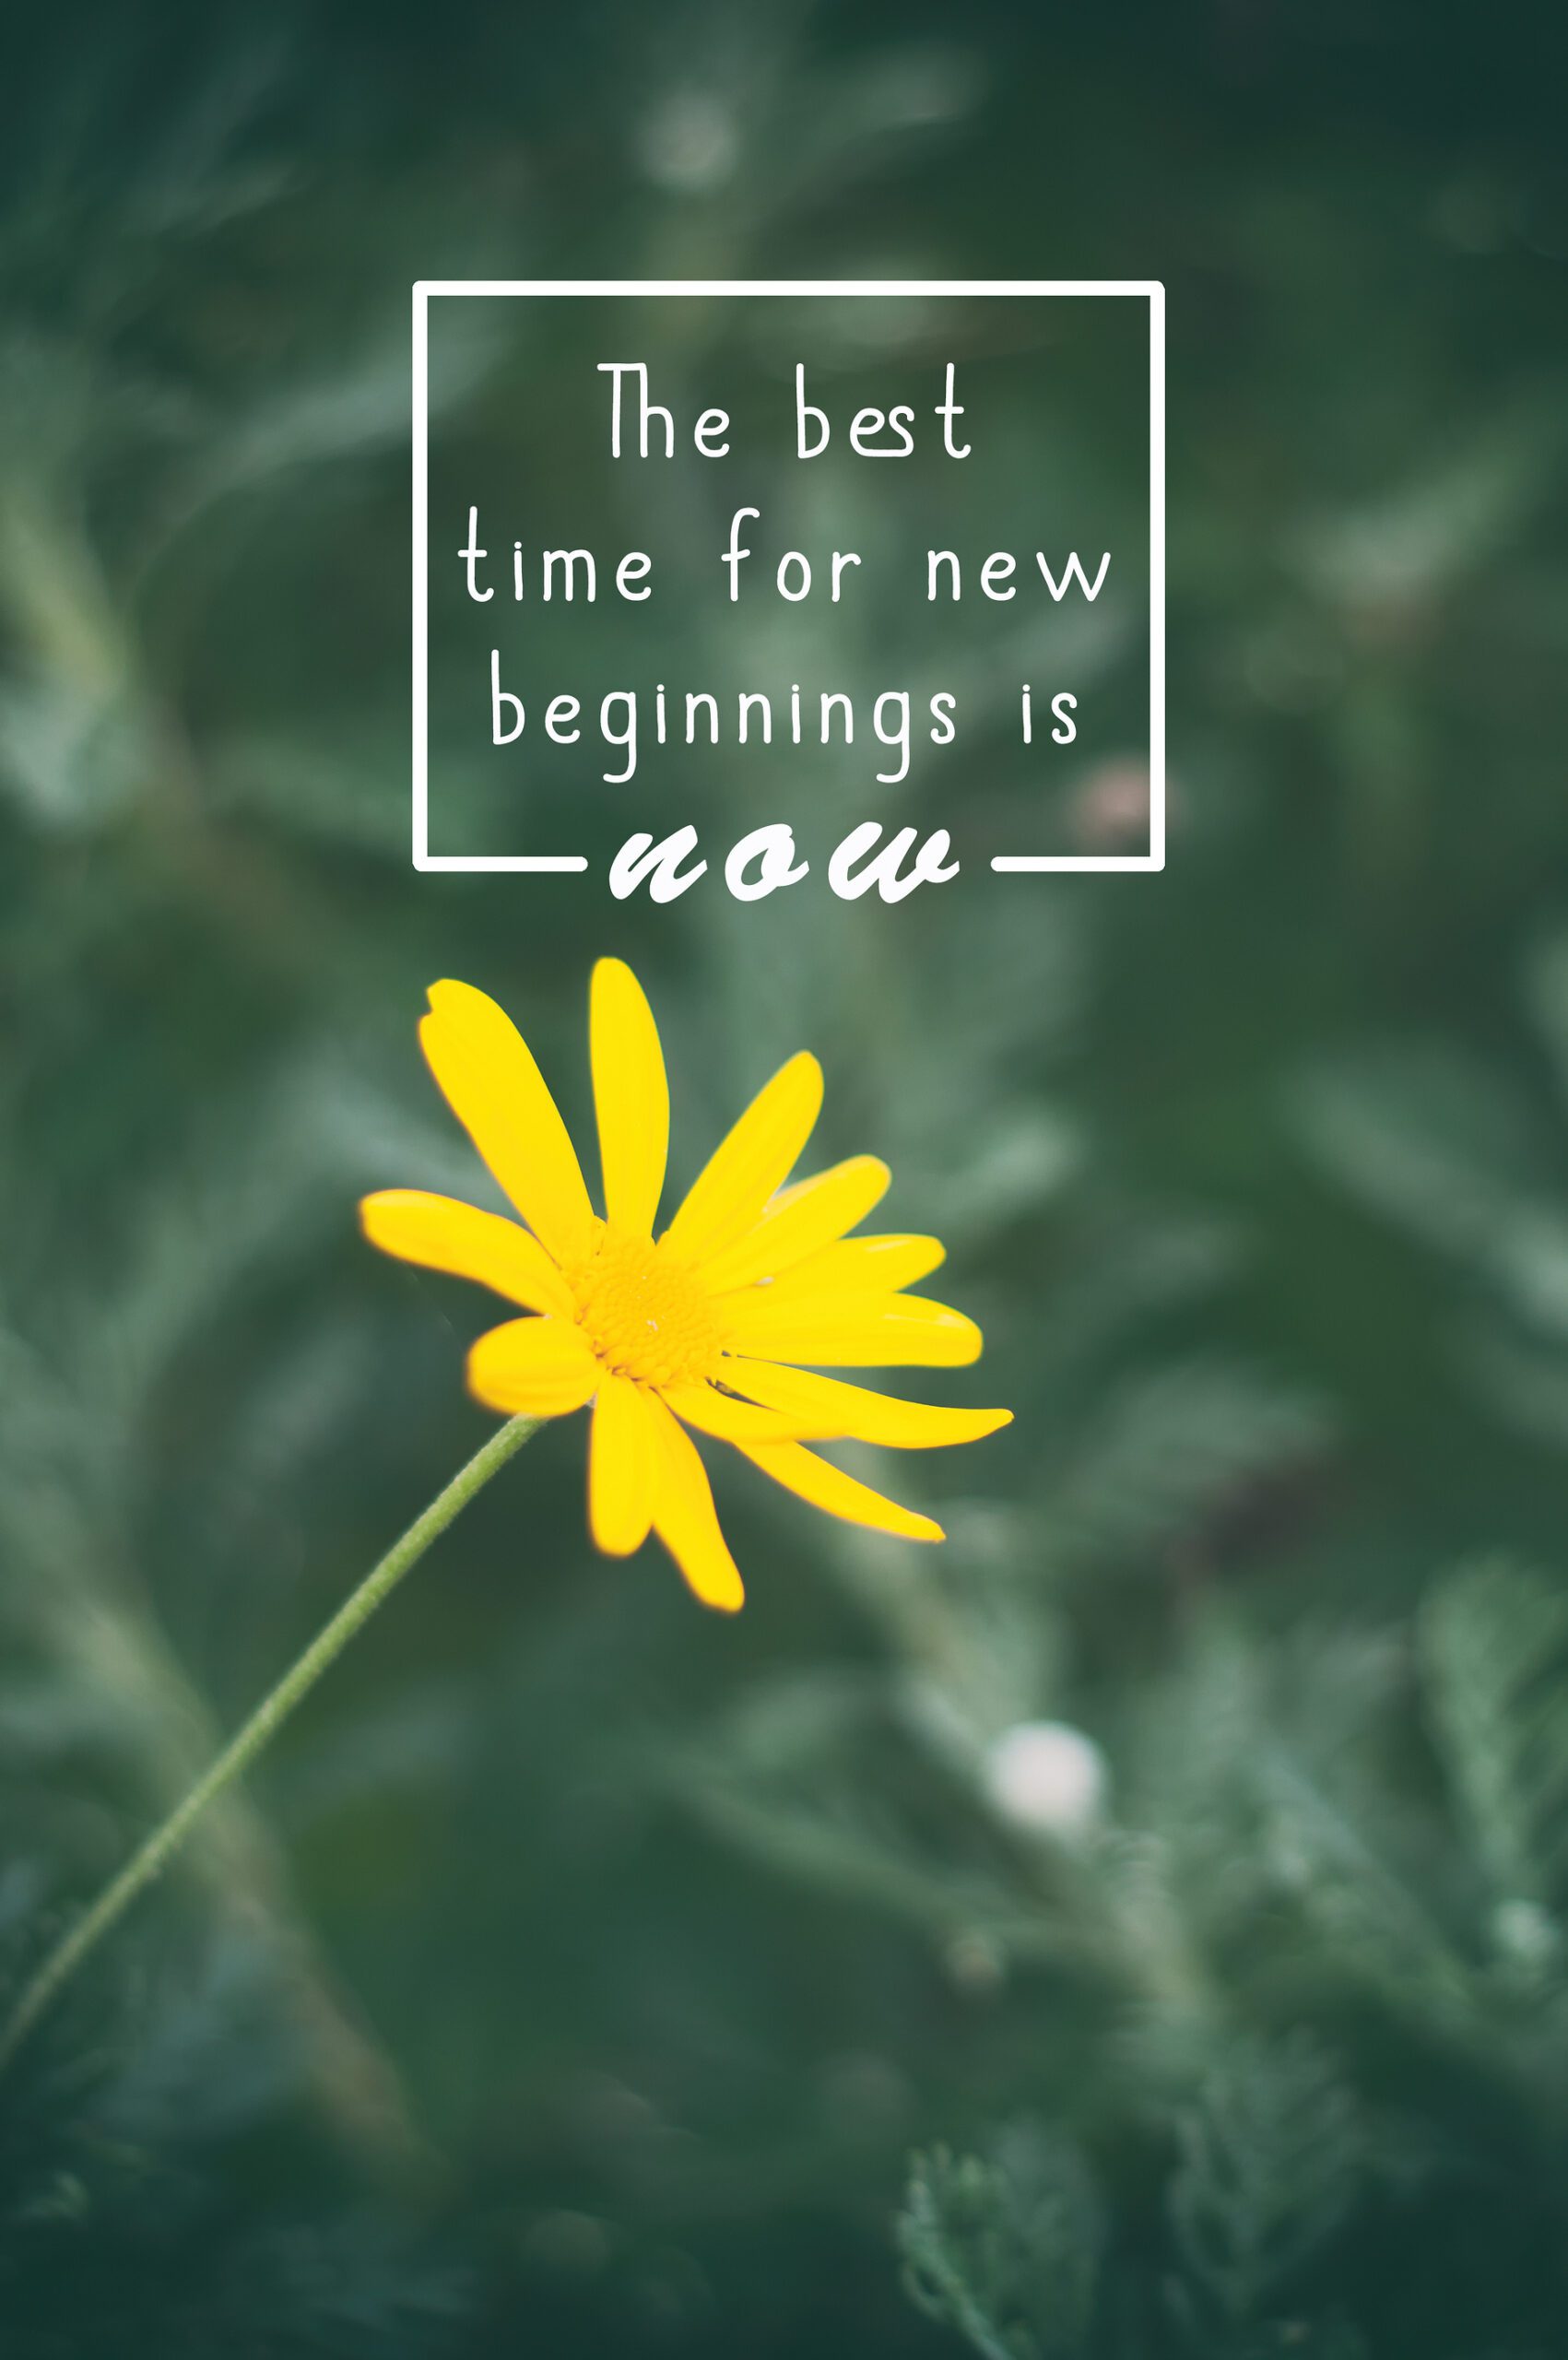 The best time for new beginnings is now.